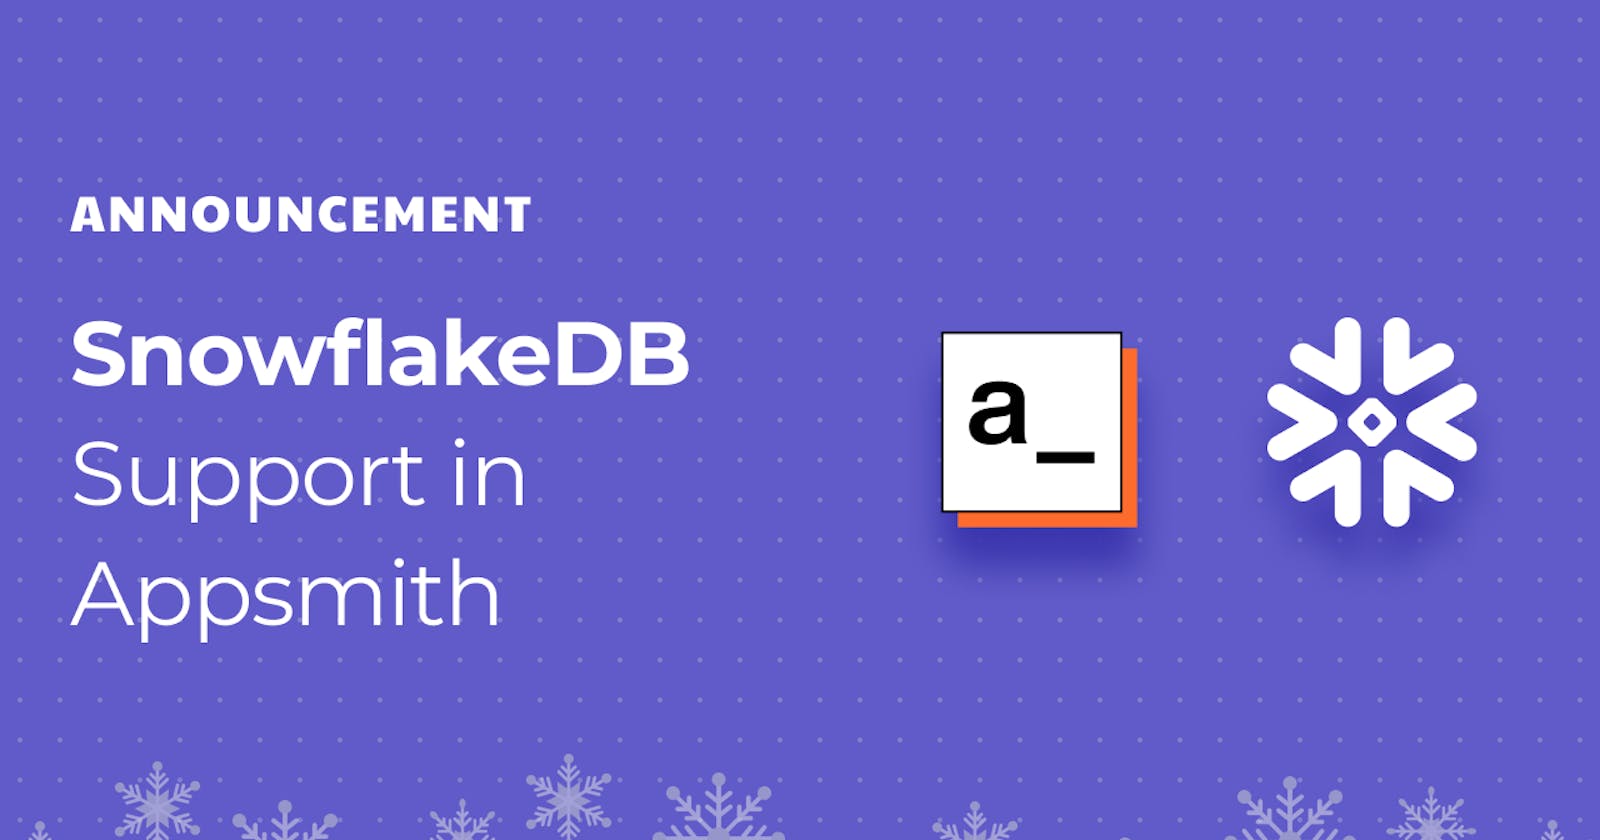 Introducing the all-new SnowflakeDB Integration on Appsmith